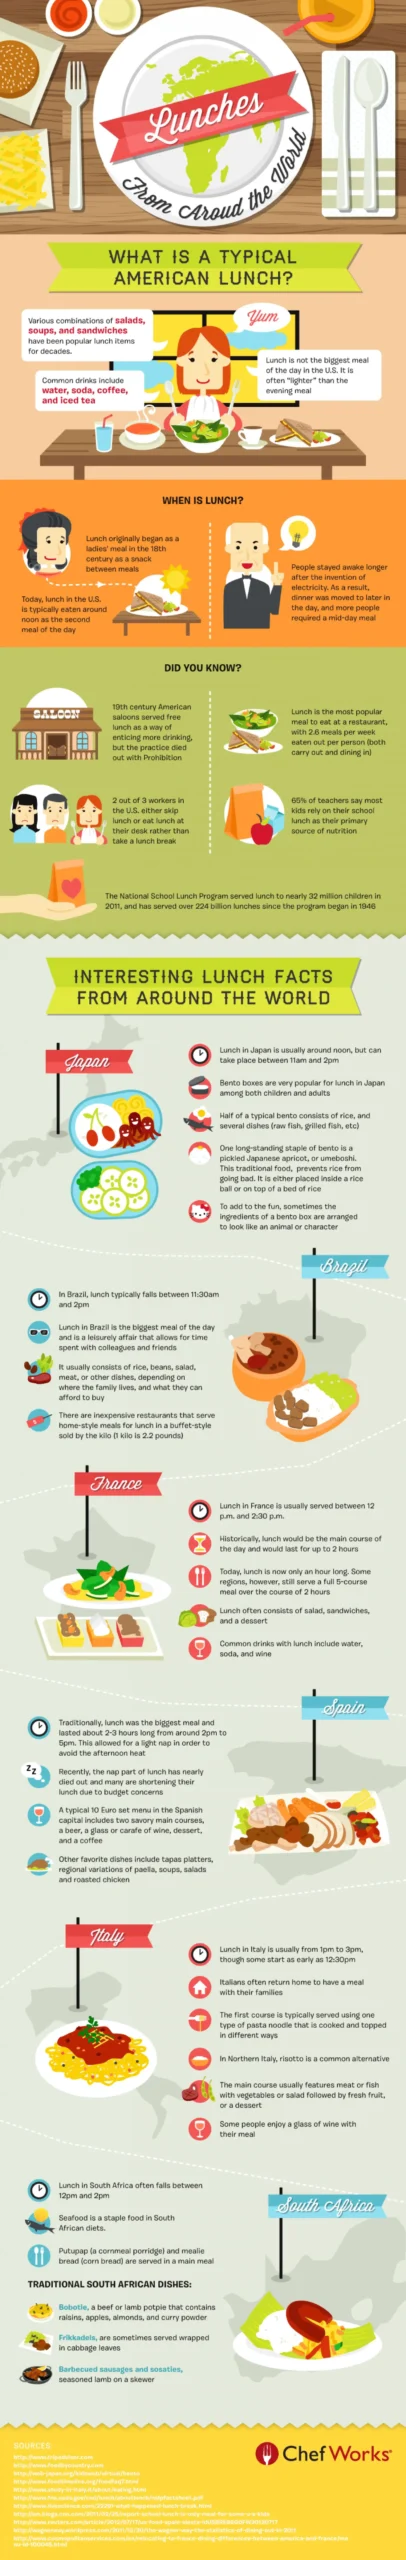 Interesting Facts About Lunch By Countries [InfoGraphic]
